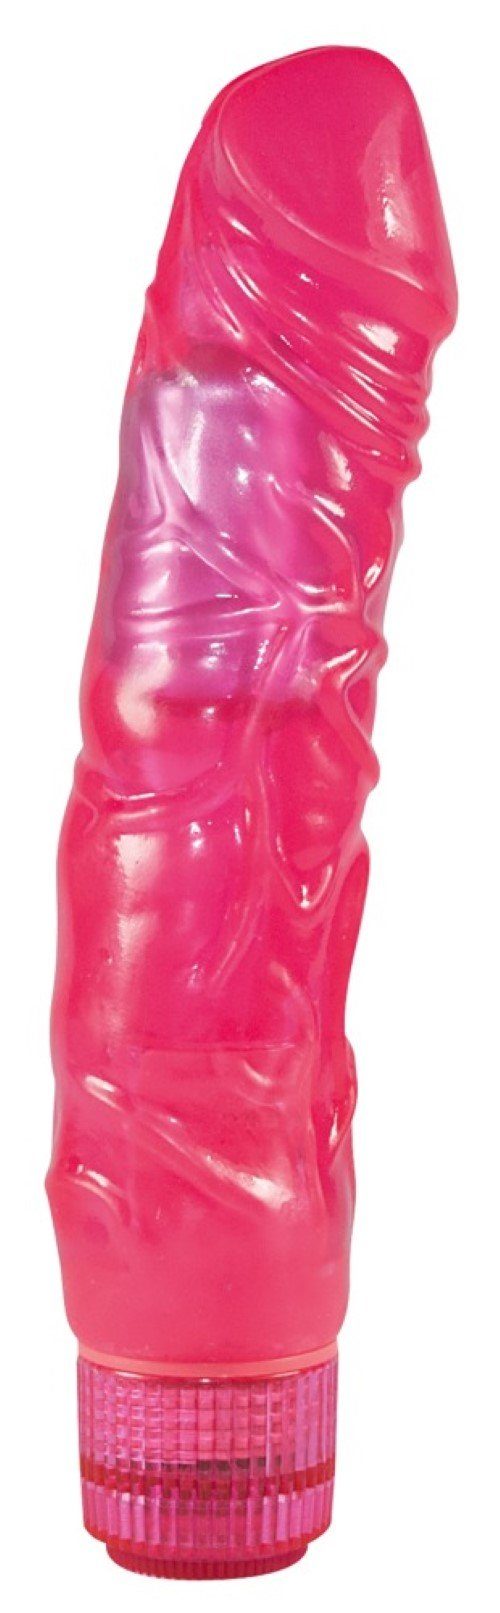 Pink large You2Toys- Love Vibrator You2Toys